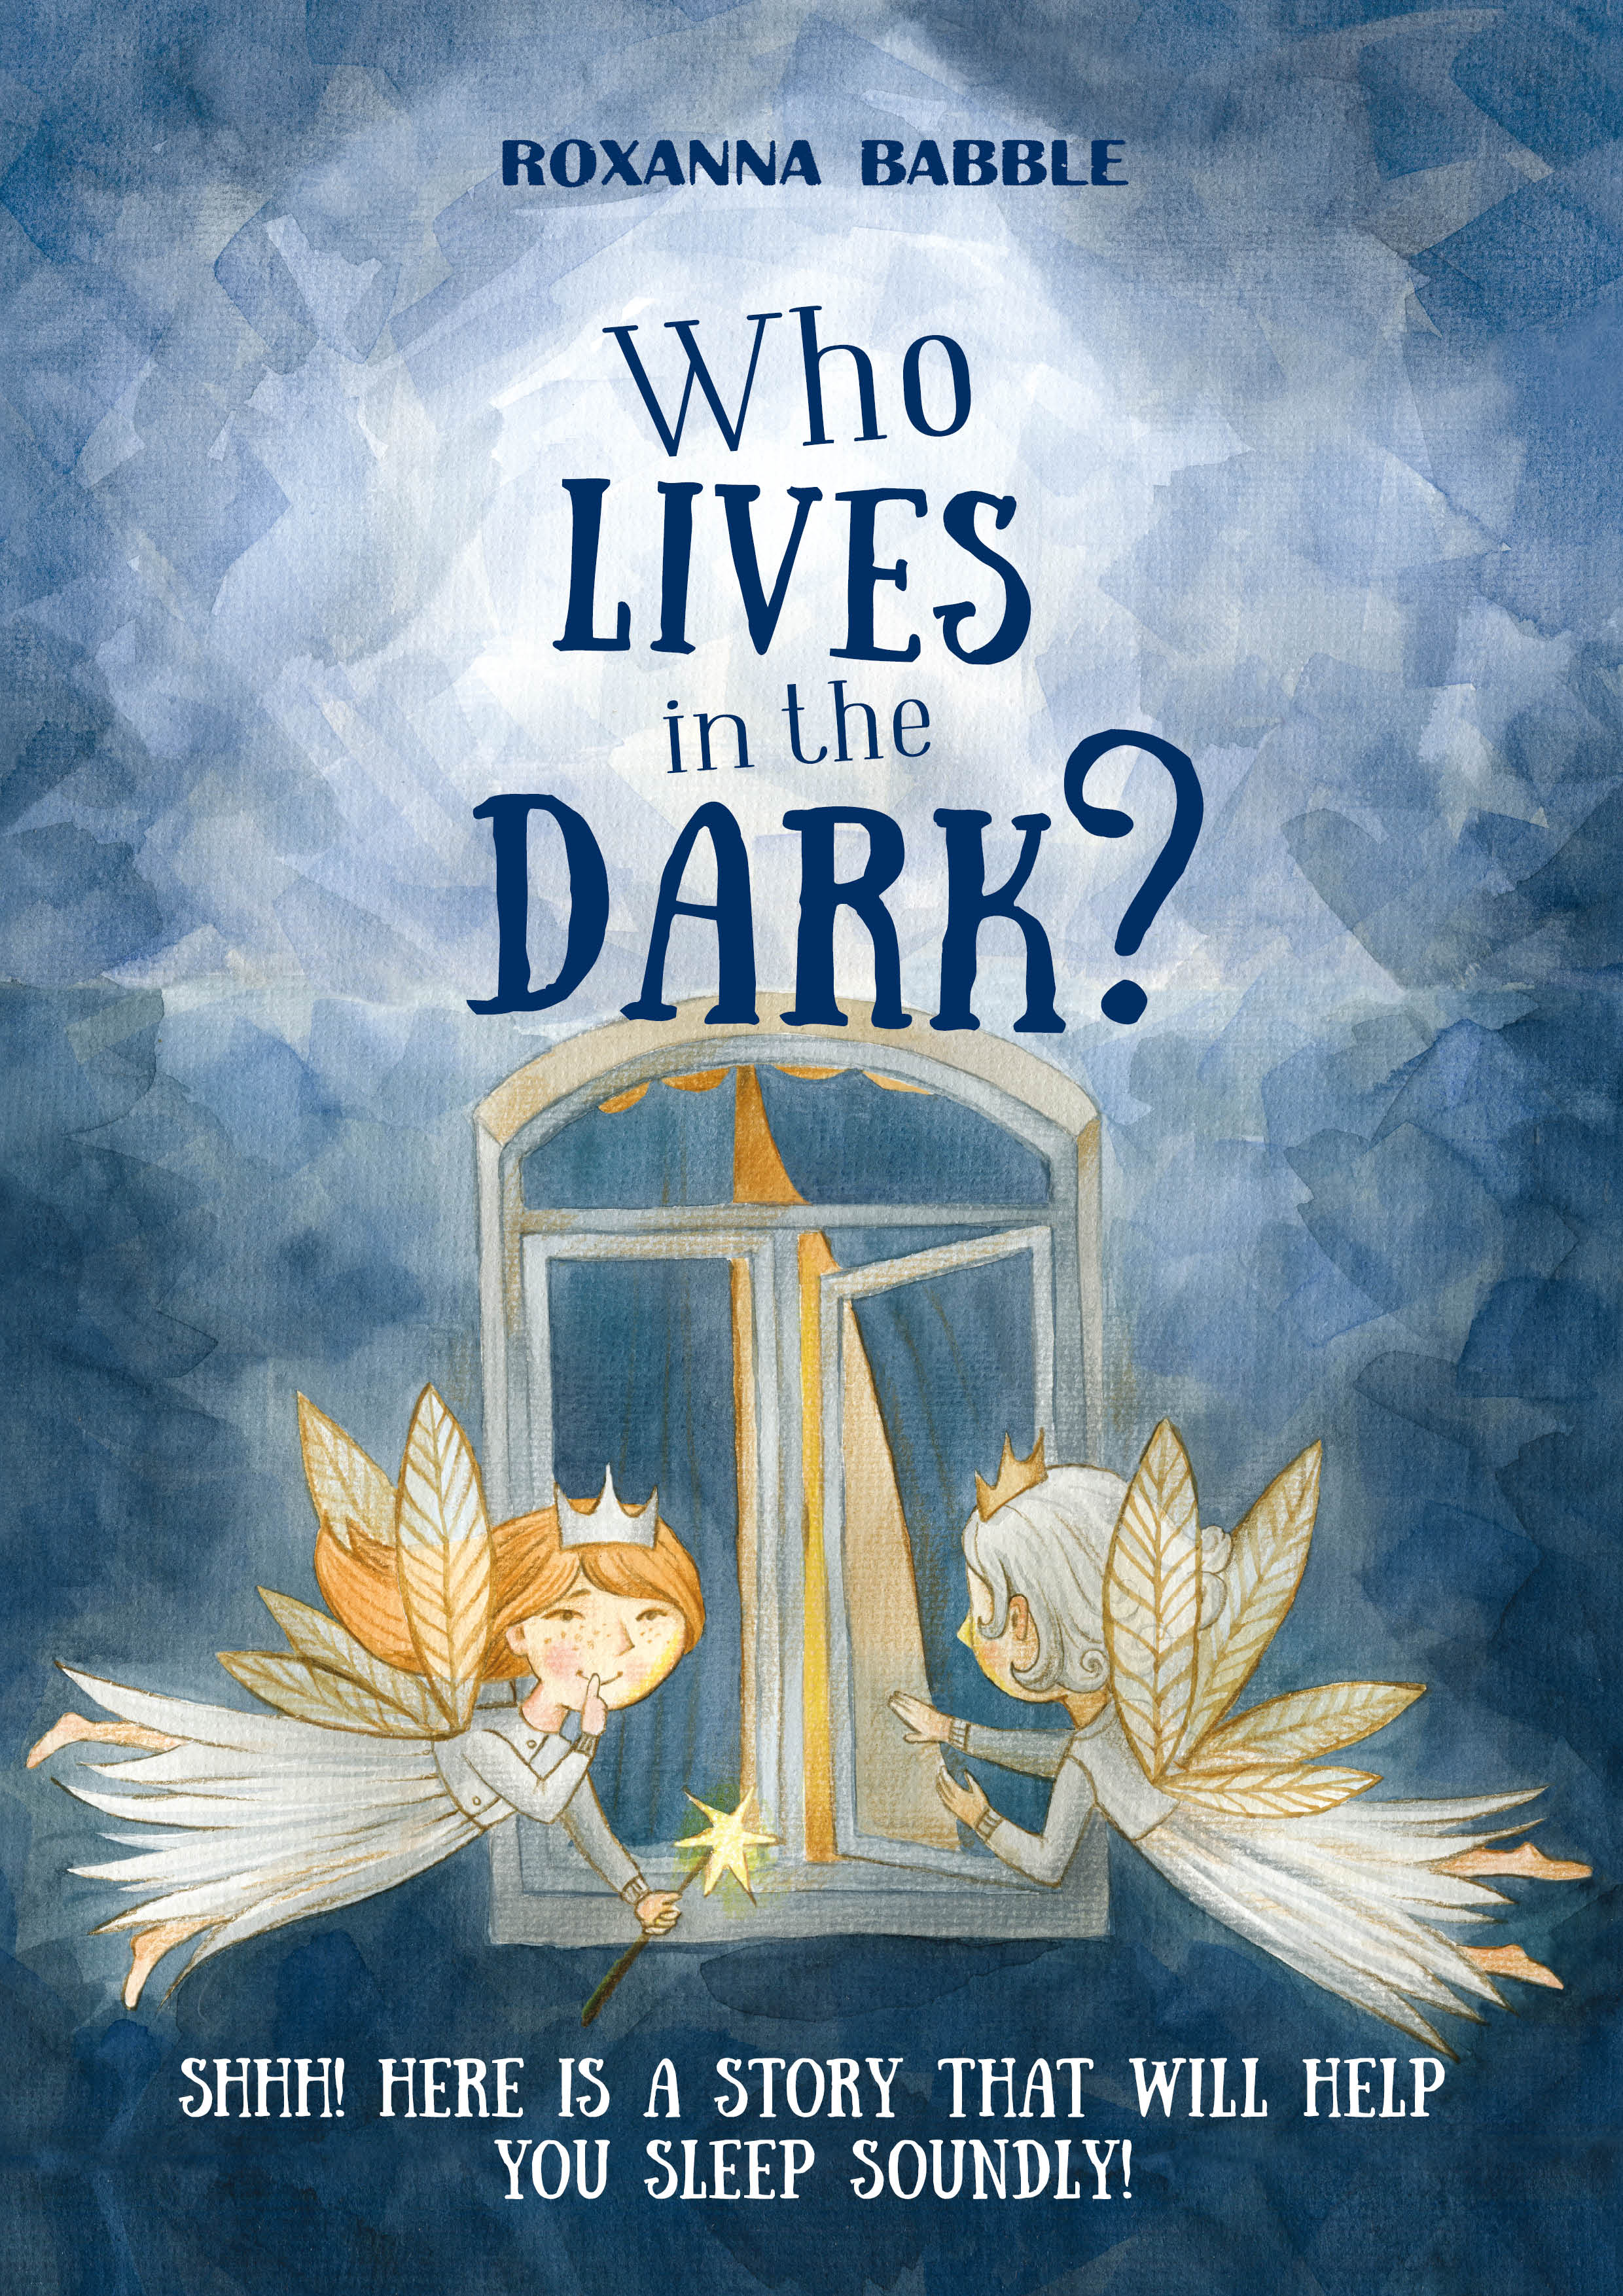 FREE: Who lives in the dark: Is a story that will help you sleep soundly by Roxanna Babble